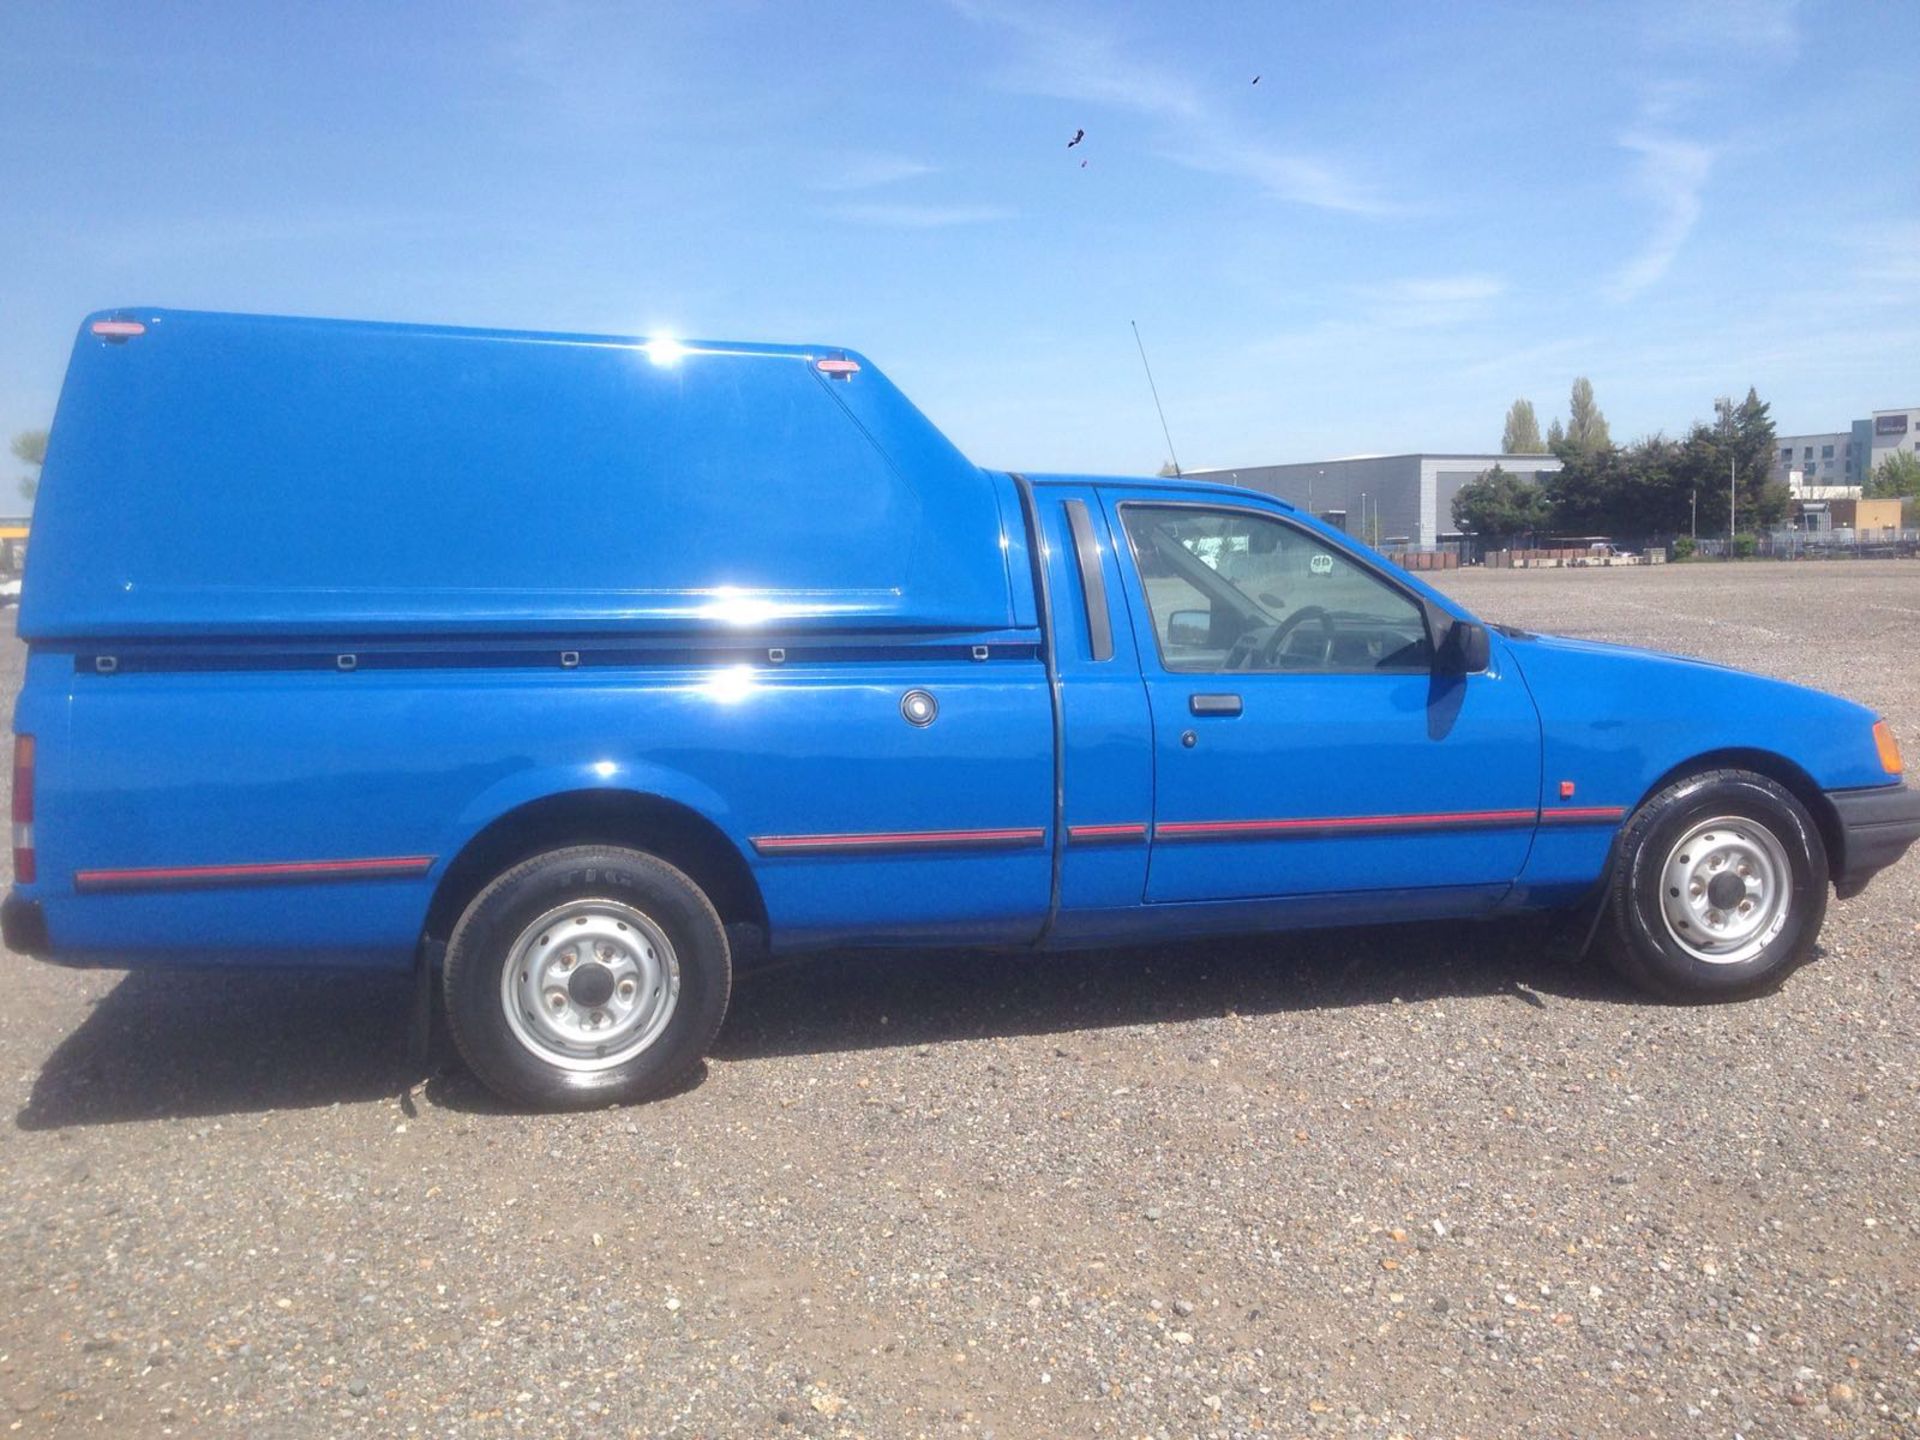 Ford P100 pickup, 1.8 turbo diesel 1991/J 39,000 miles with truckman top 2 owners - Image 3 of 14